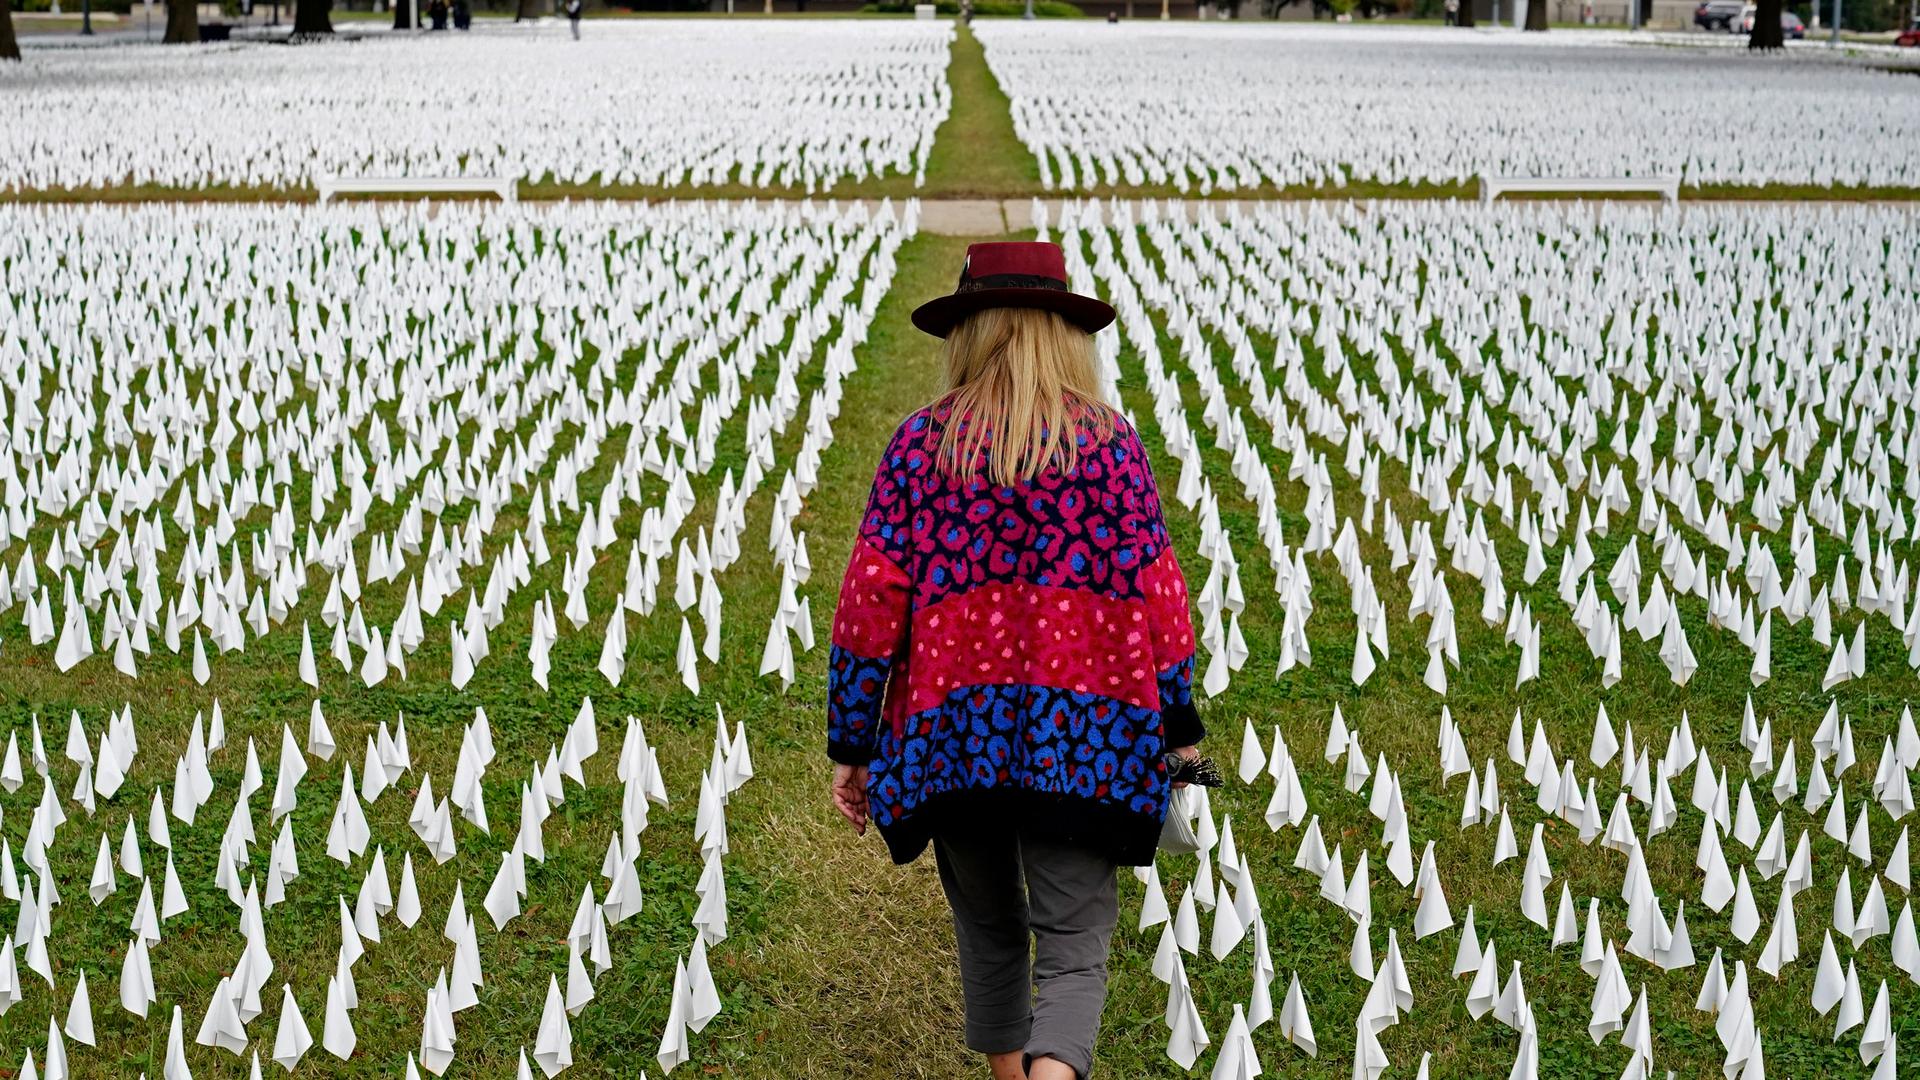 A woman wearing a colorful sweater and brimmed hat is shown from behind walking in a narrow path on a lawn filled with small white flags.